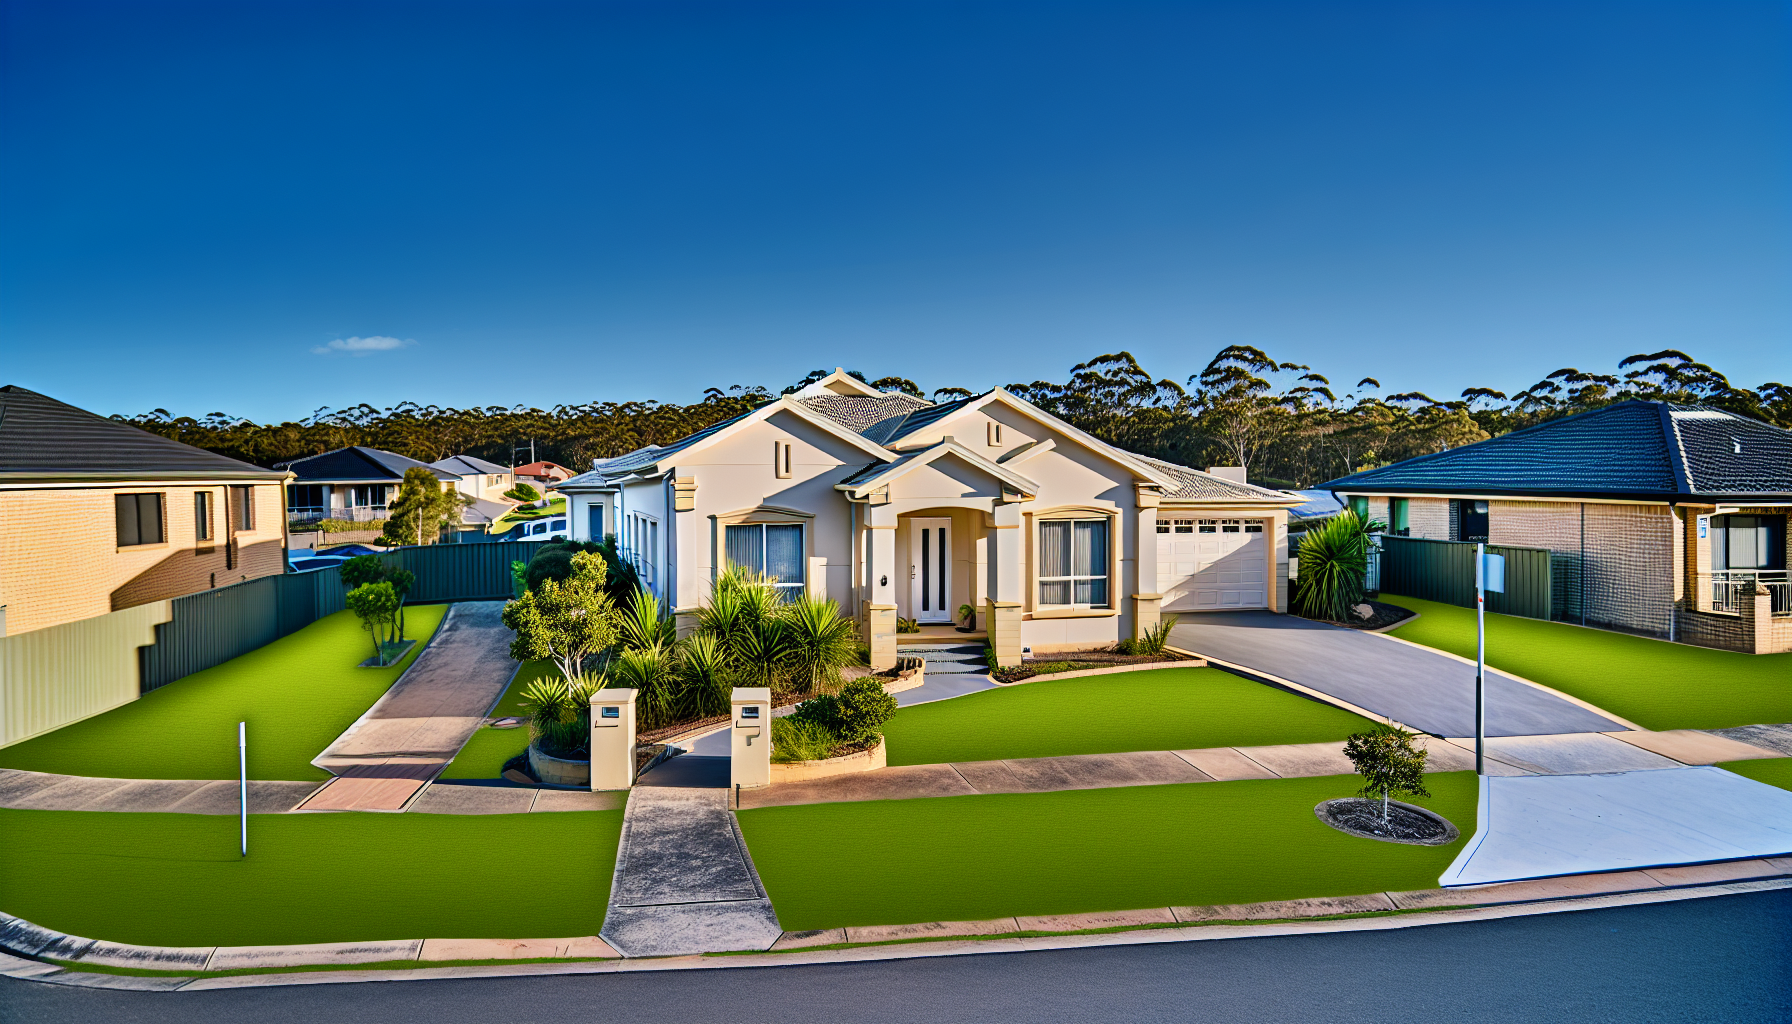 Photo of a residential property in New South Wales